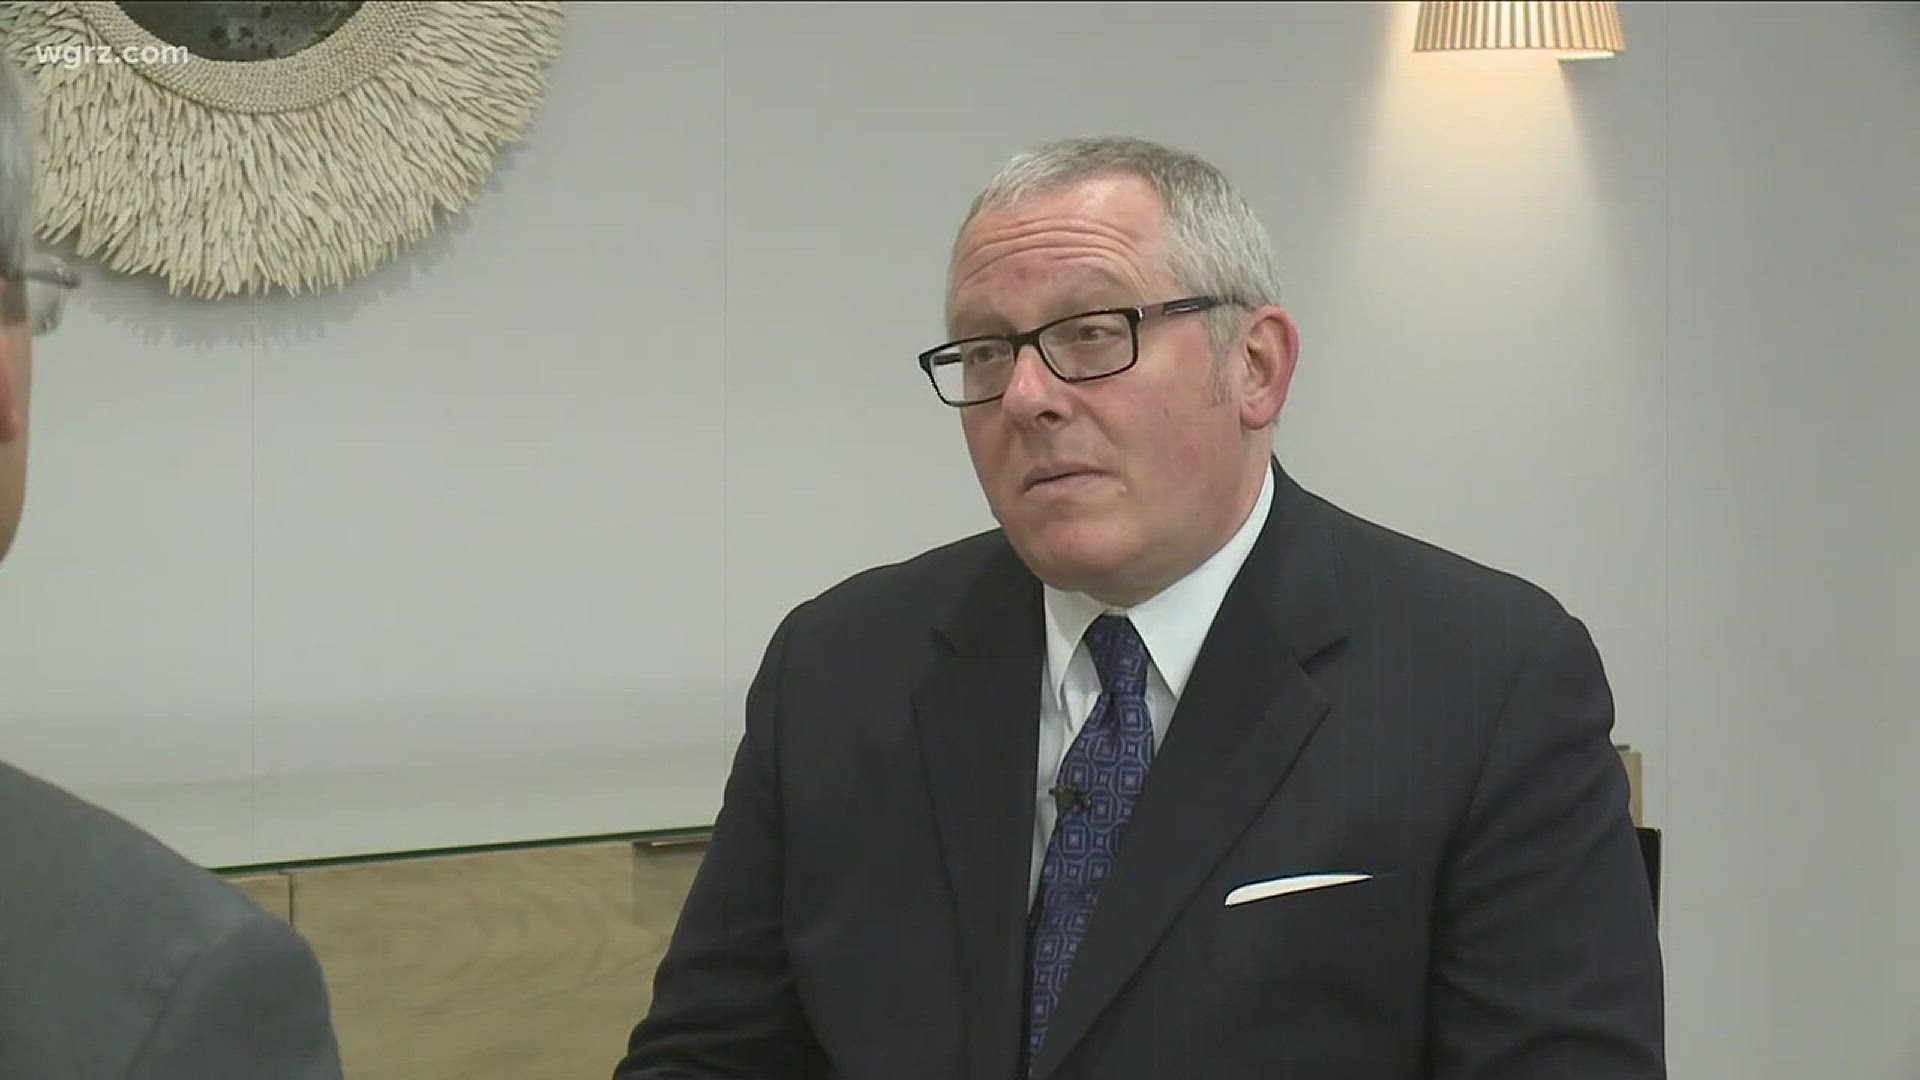 Michael Caputo Questioned By Mueller's Team